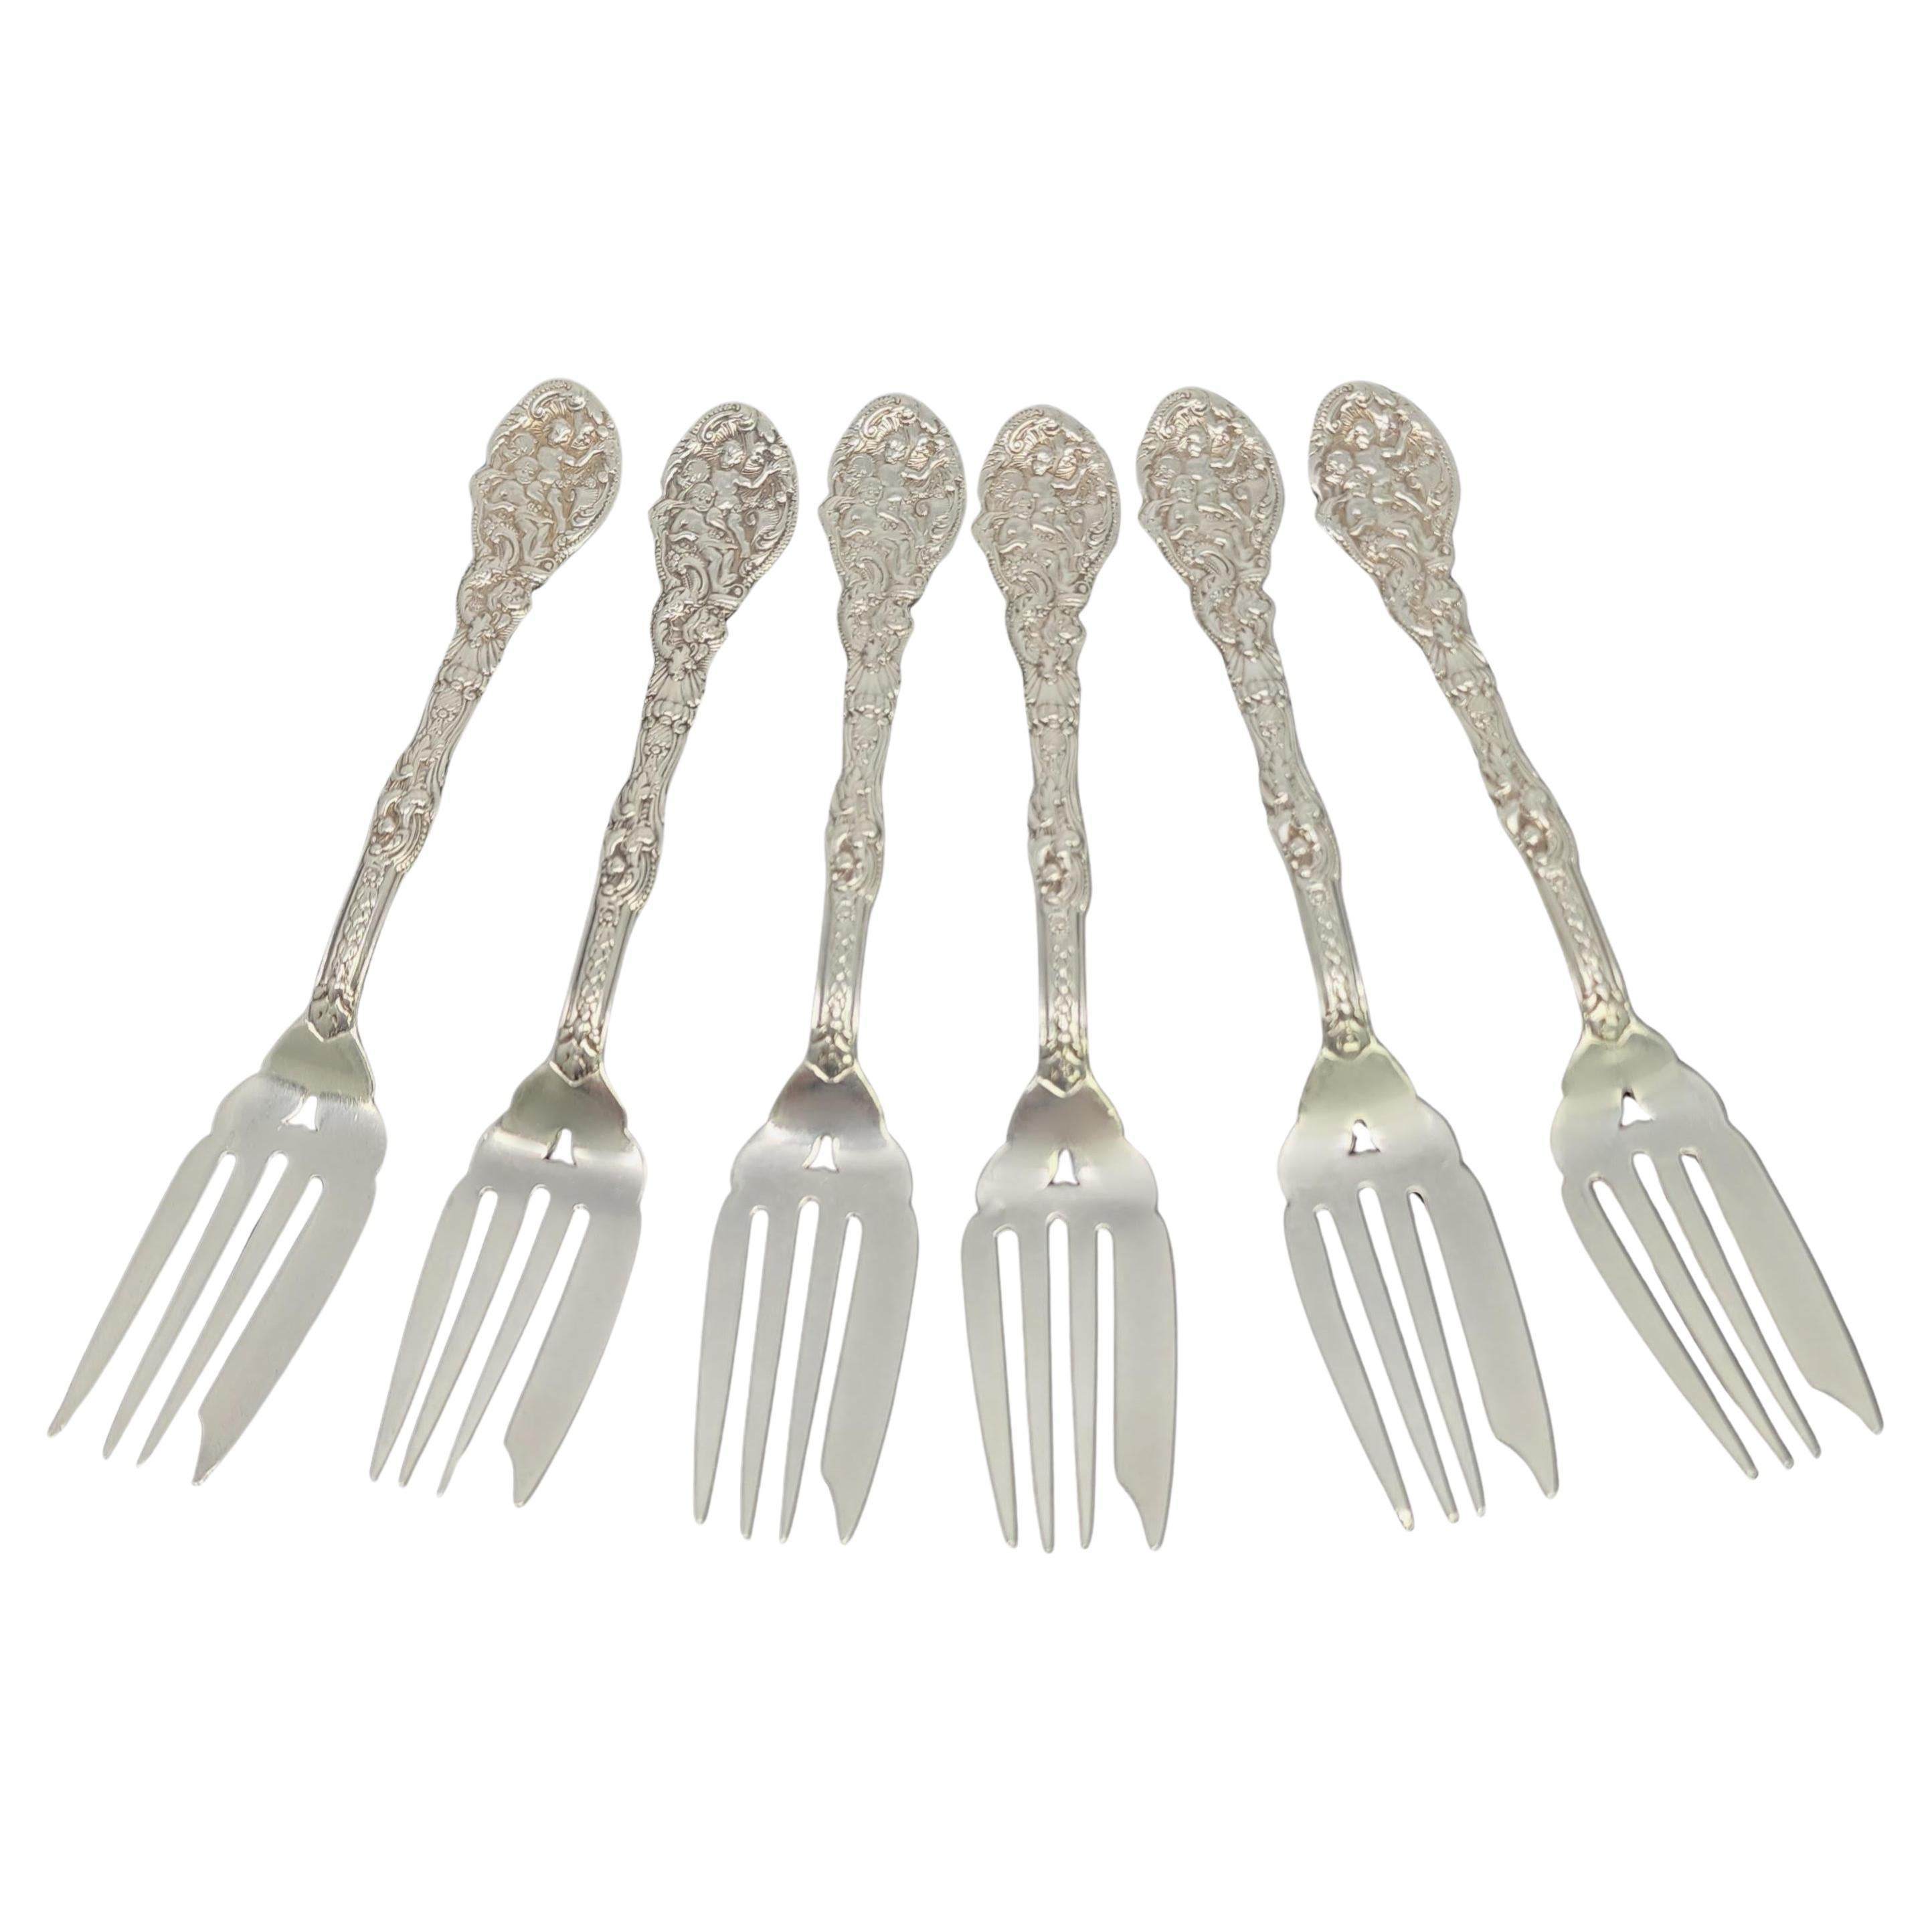 Set of 6 Gorham Versailles Sterling Silver Pastry Forks 6" w/Mono #17144 For Sale